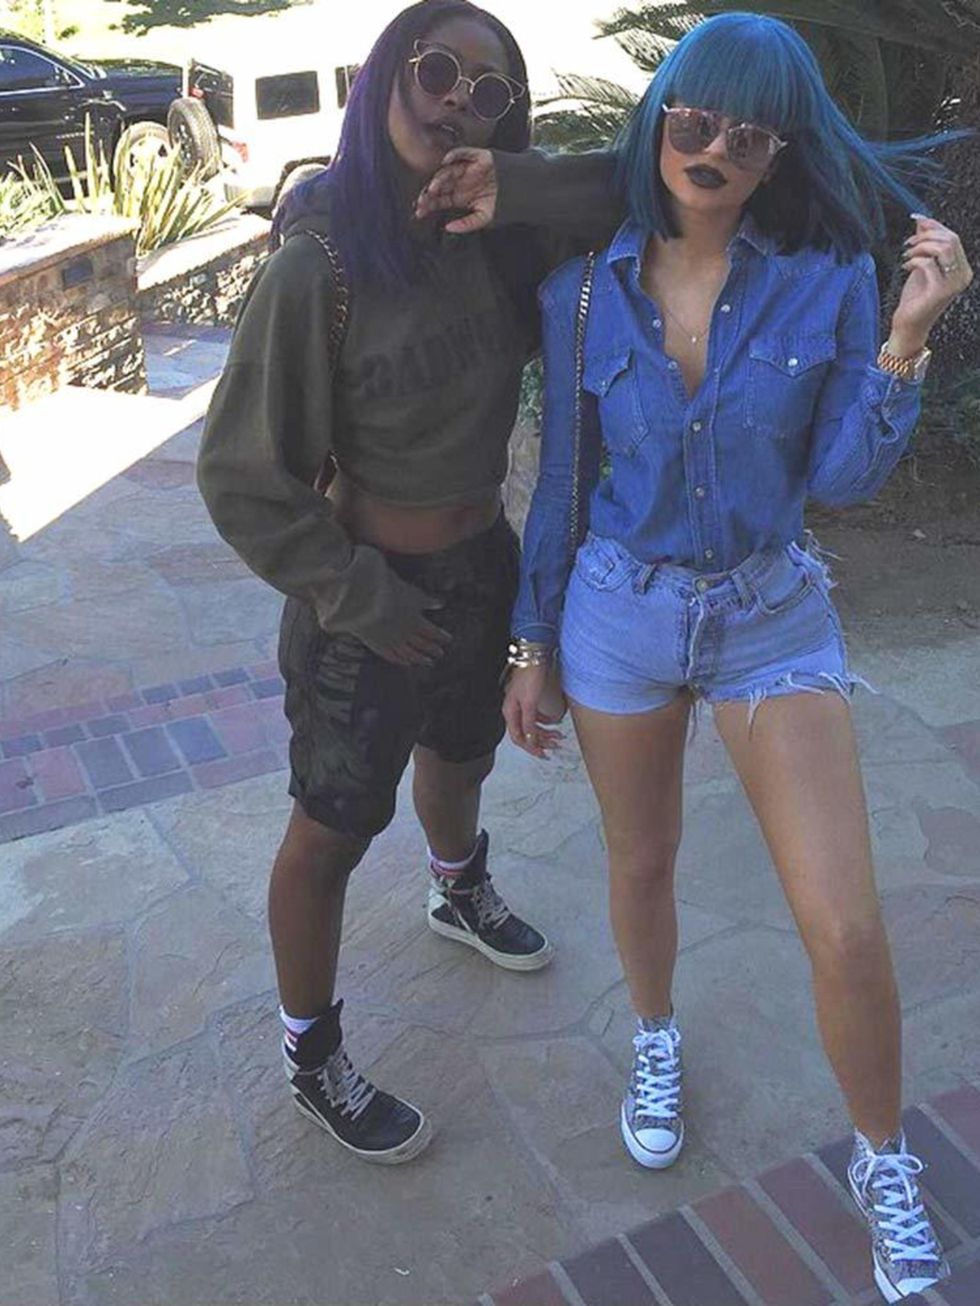 Blue hair don't care. Kylie Jenner in double denim, August 2015.